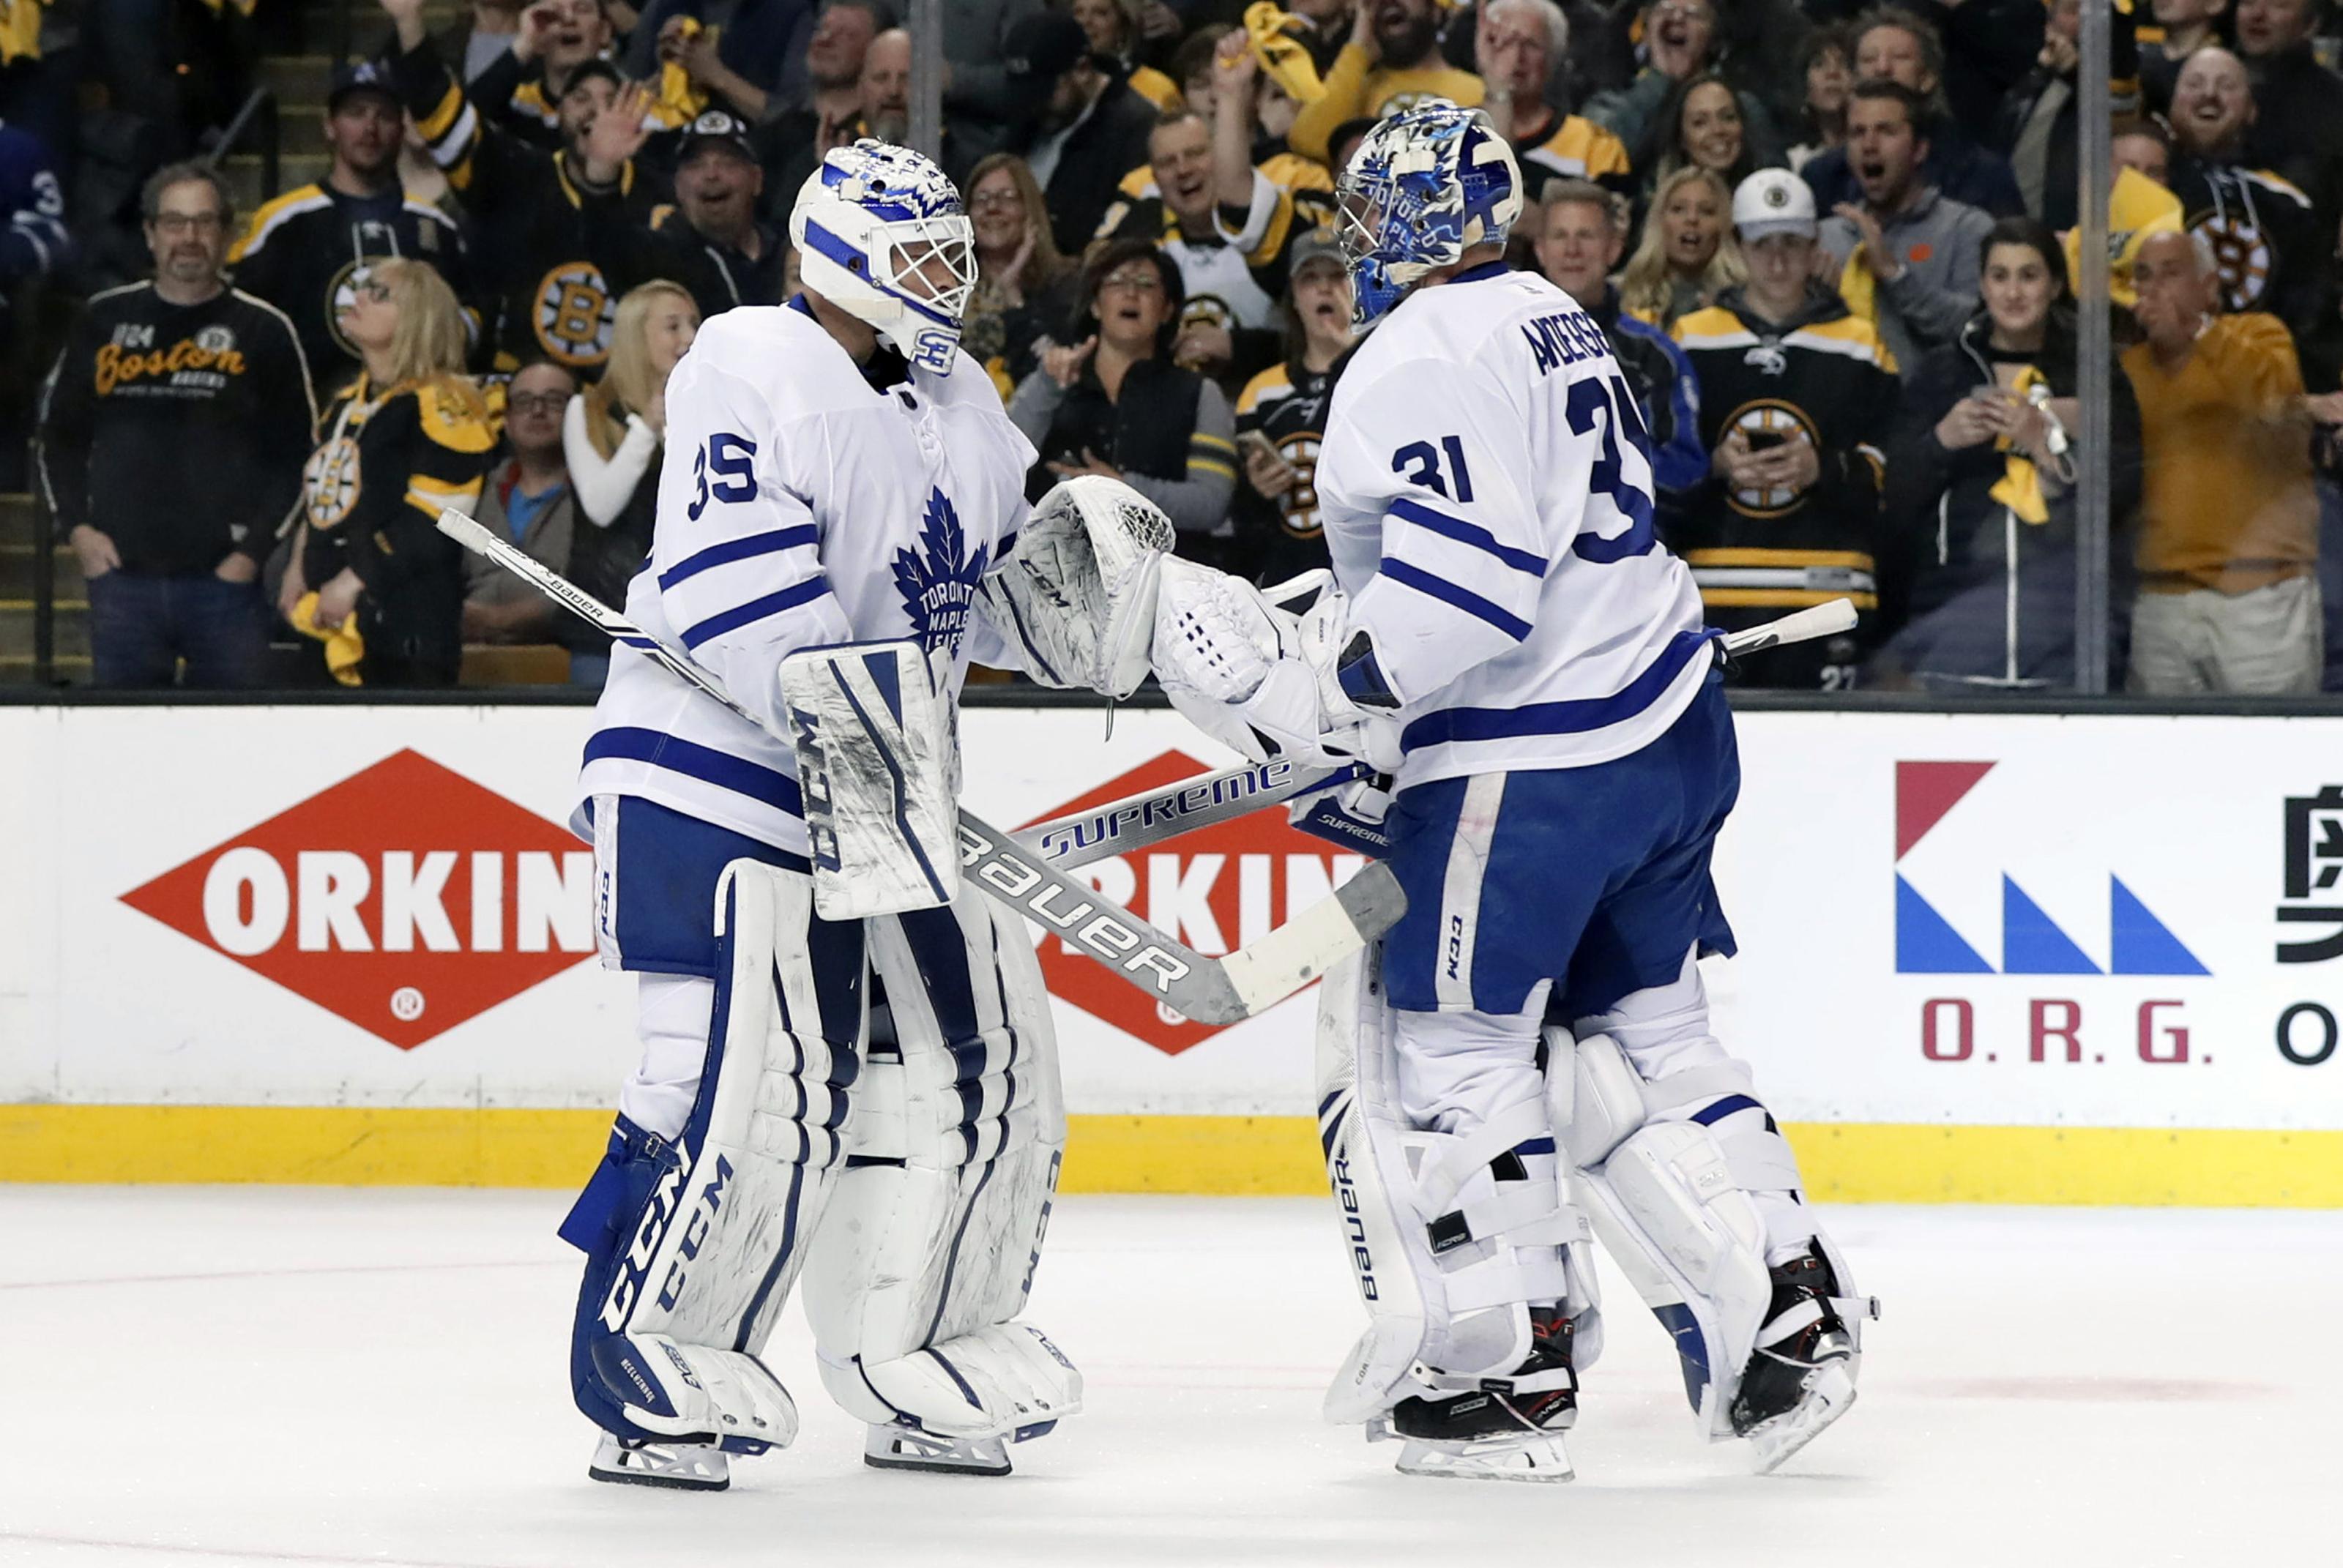 Toronto Maple Leafs: Frederik Andersen off to a Great Start